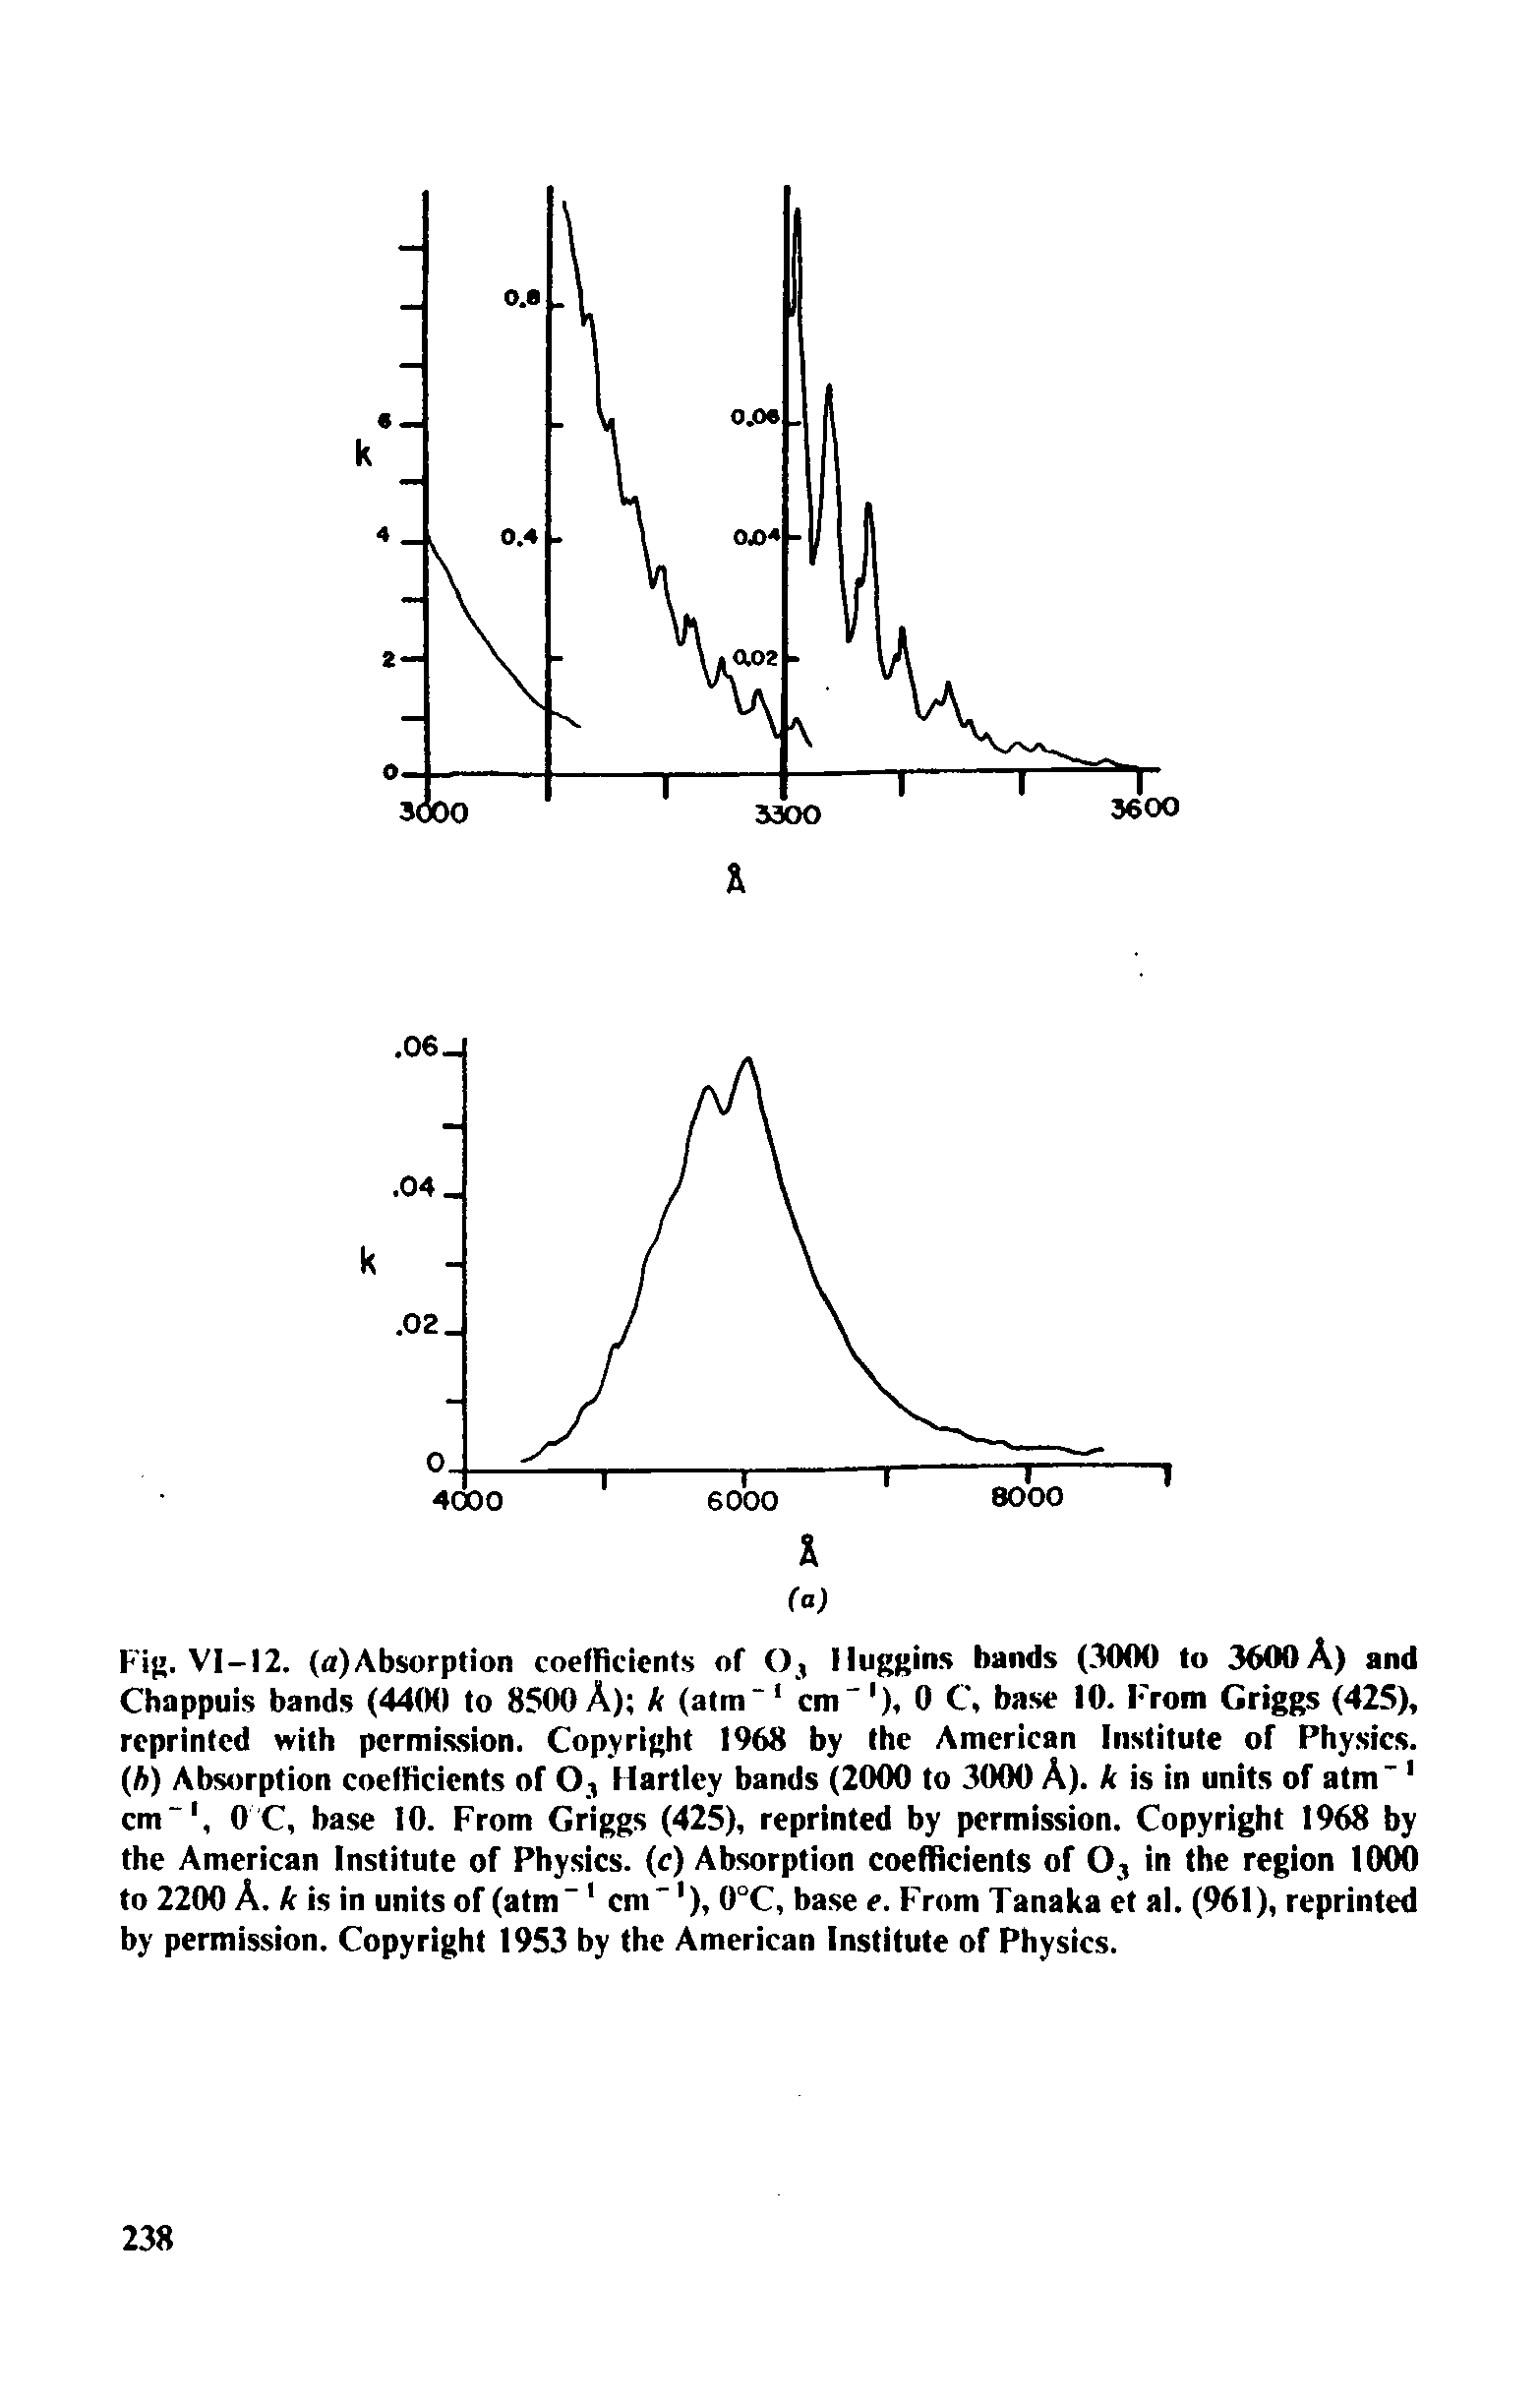 Fig. VI-12, (a)Absorption coefficients of (), Huggins bands (3000 to 3600 A) and Chappuis bands (44(H) to 8500 A) k (atm" 1 cm" ), 0 C, base 10. From Griggs (425), reprinted with permission. Copyright 1968 by the American Institute of Physics. (h) Absorption coefficients of O, Hartley bands (2000 to 3000 A), k is in units of atm" 1 cm"1, 0 C, base 10. From Griggs (425), reprinted by permission. Copyright 1968 by the American Institute of Physics, (c) Absorption coefficients of O, in the region 1000 to 2200 A. k is in units of (atm"1 cm" ), 0°C, base e. From Tanaka et al. (961), reprinted by permission. Copyright 1953 by the American Institute of Physics.